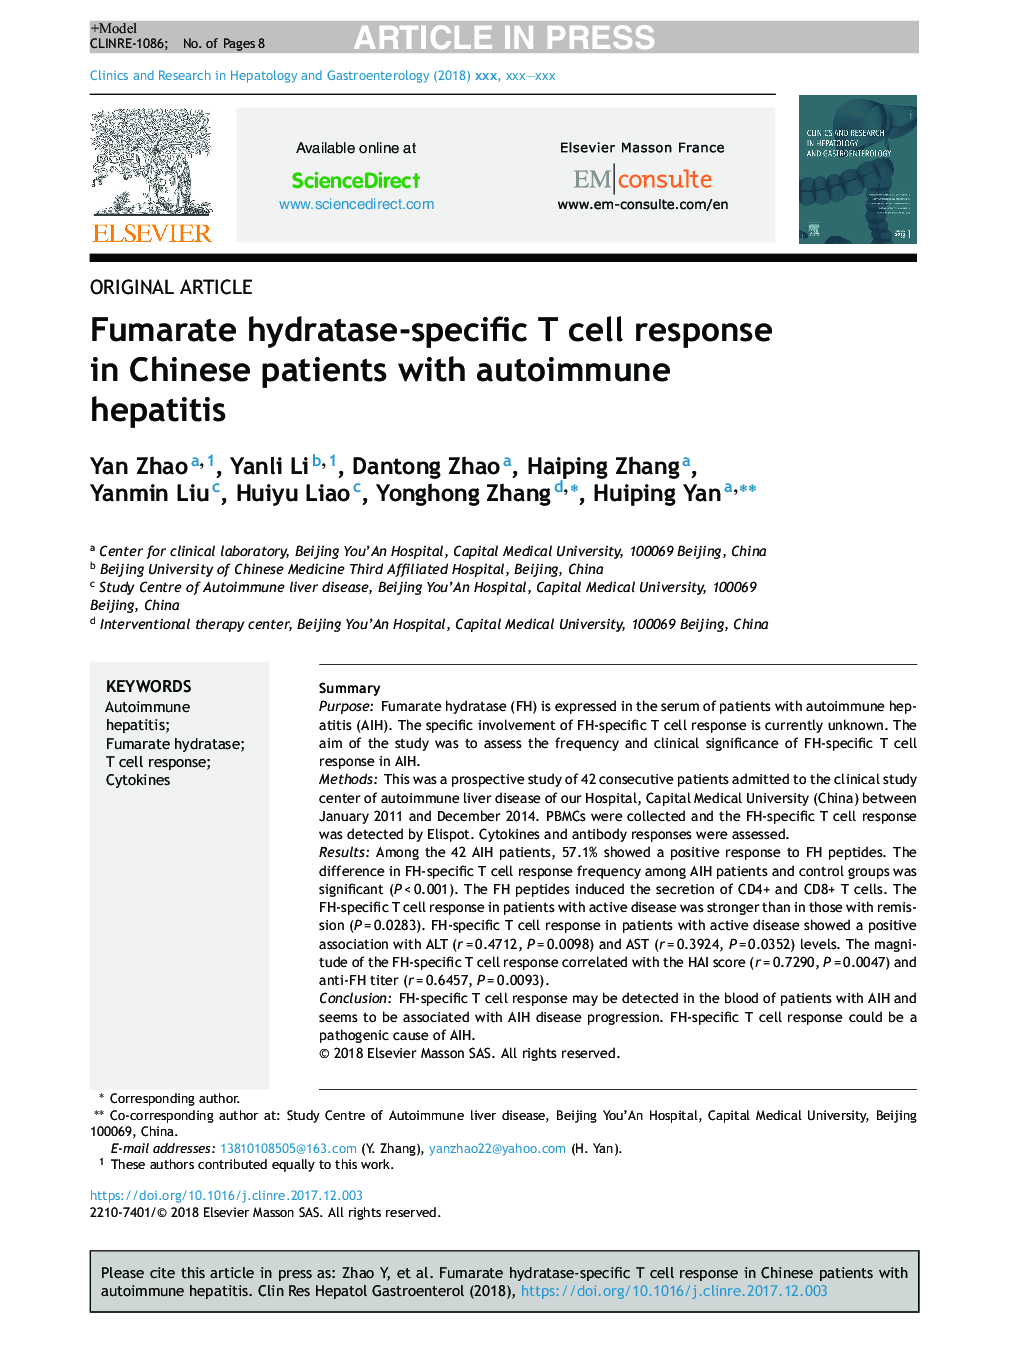 Fumarate hydratase-specific T cell response in Chinese patients with autoimmune hepatitis